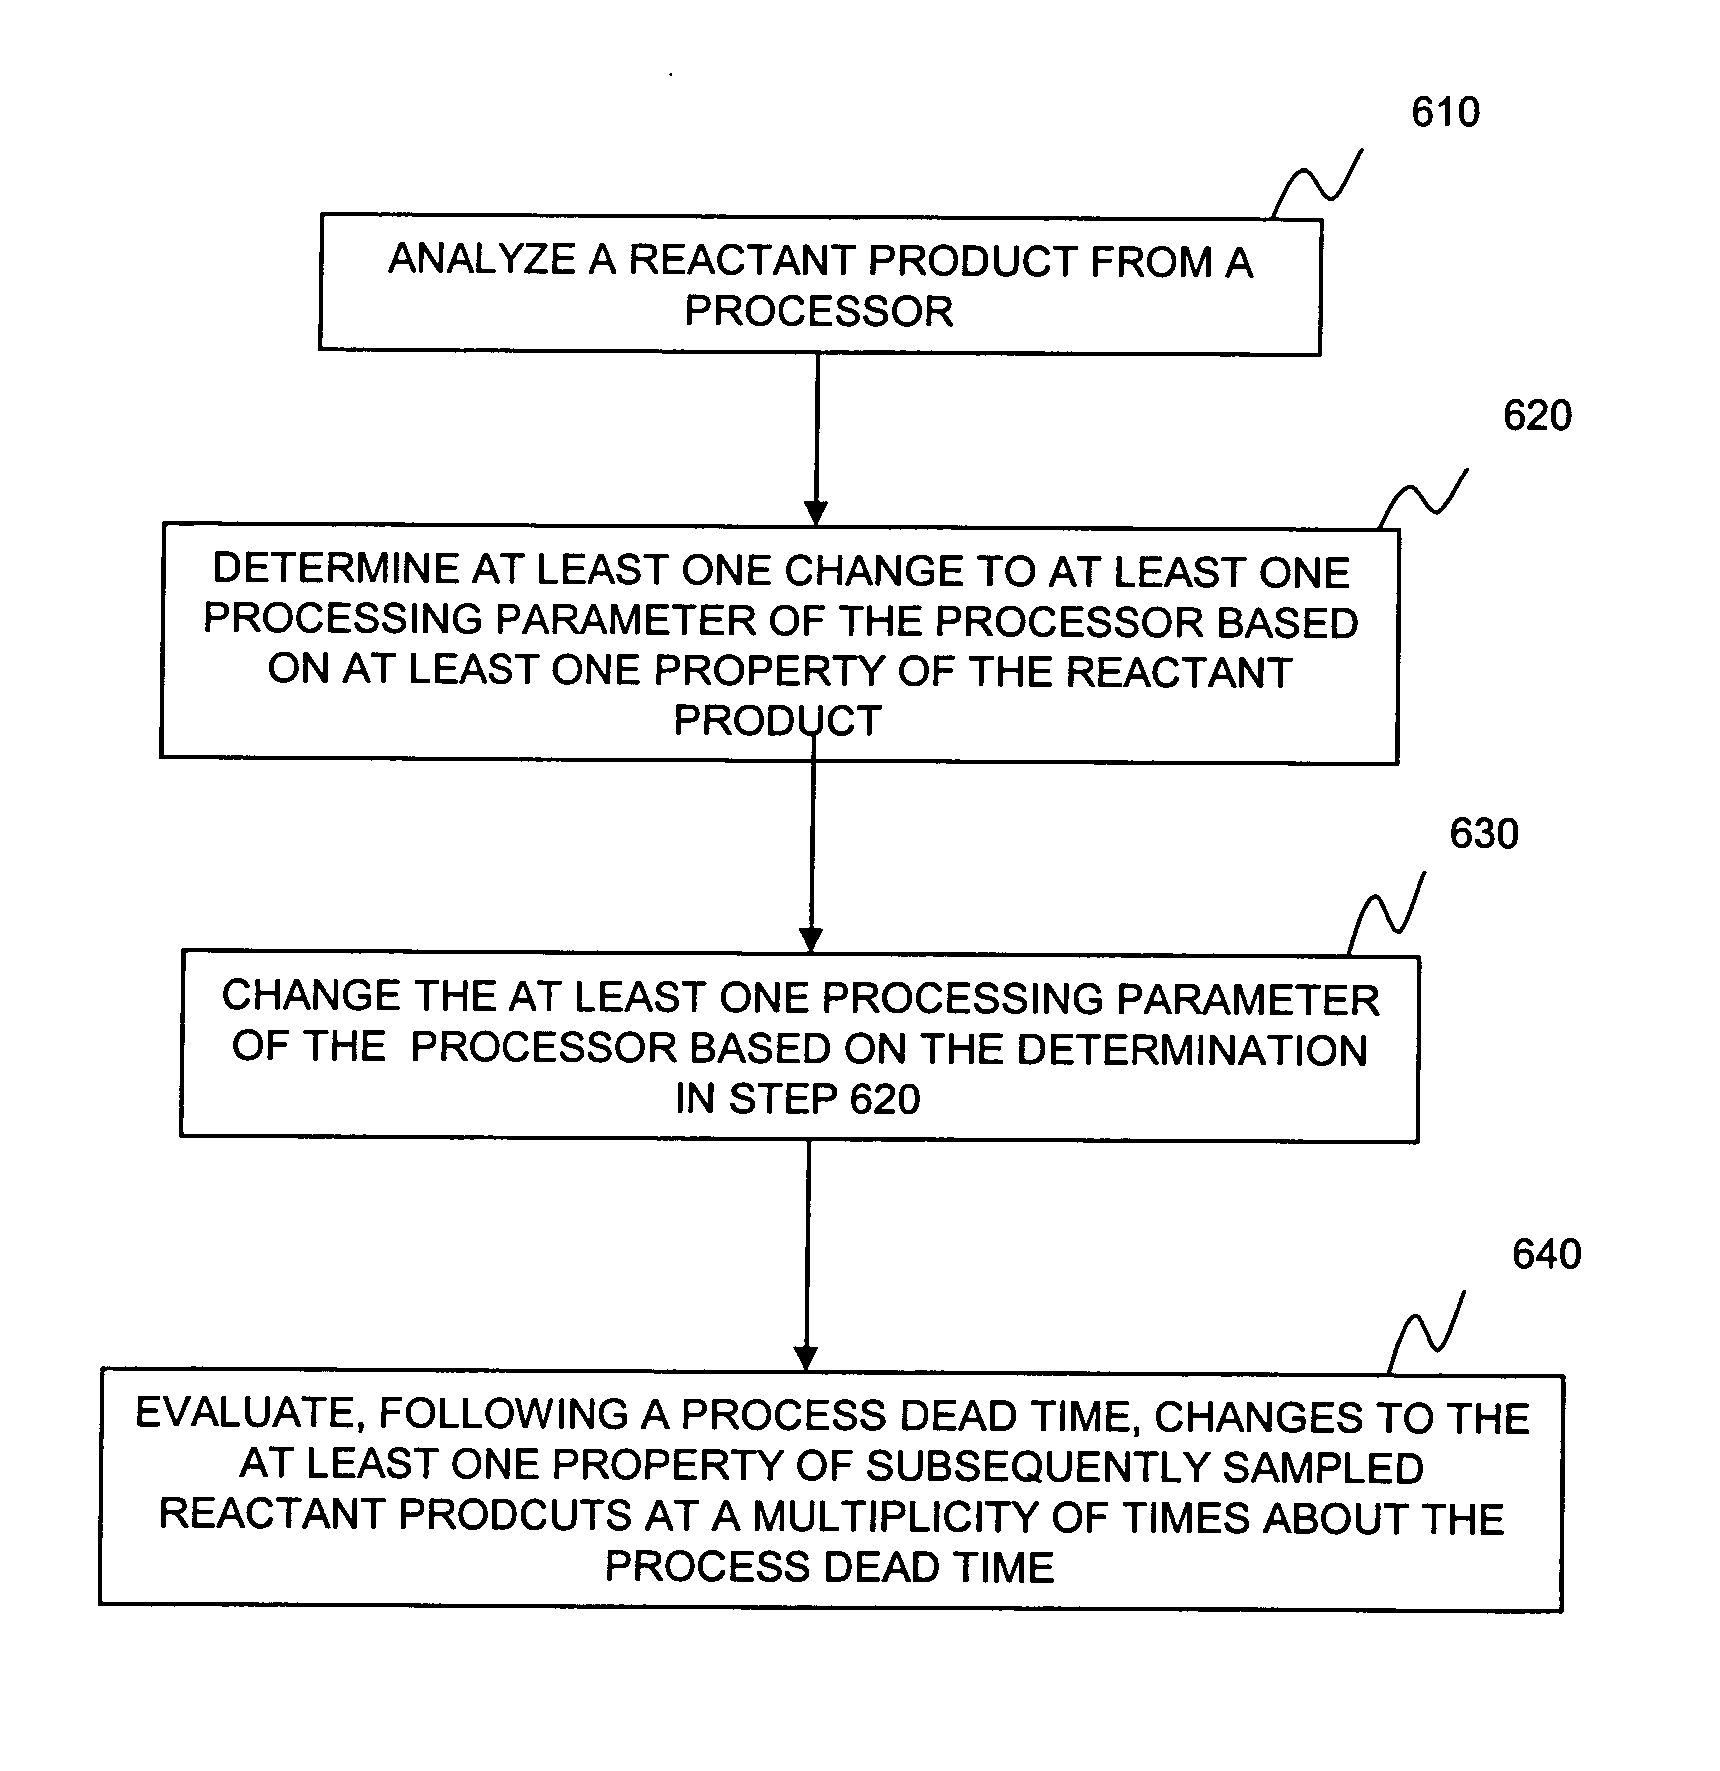 System and method for controlling a processor including a digester utilizing time-based assessments